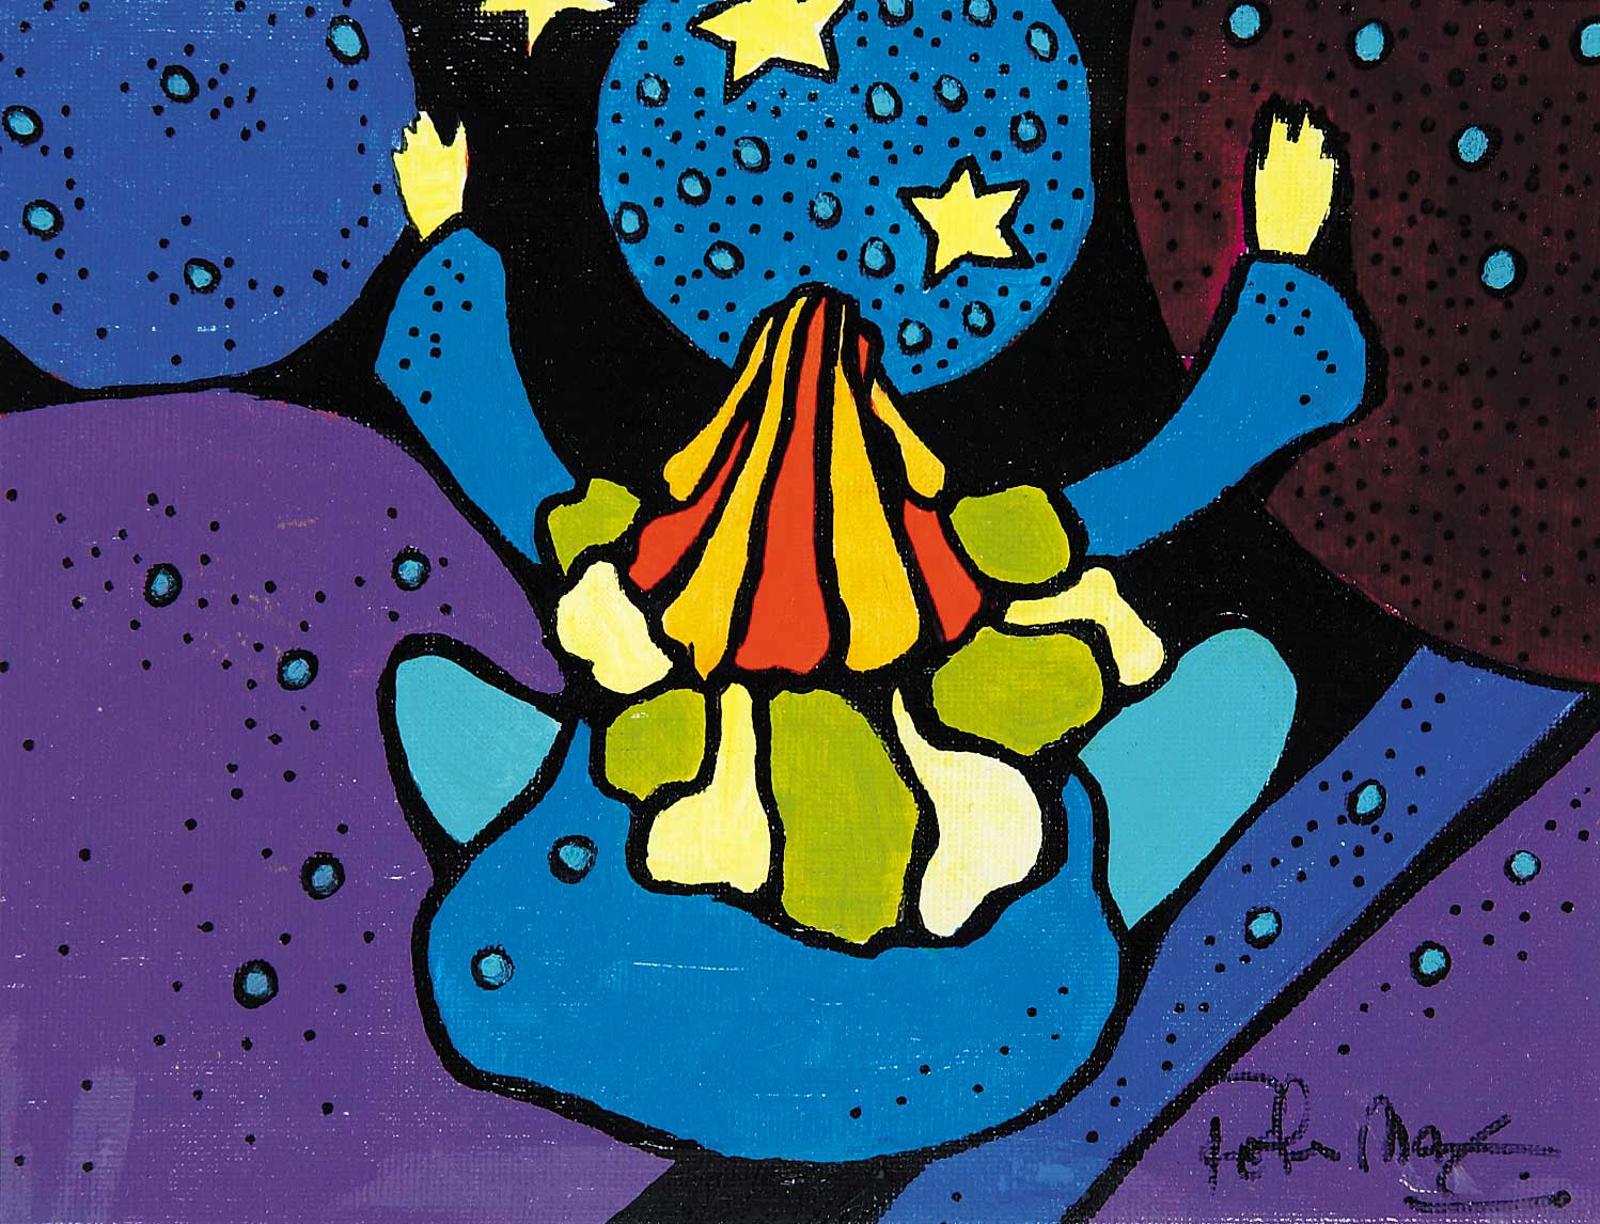 Peter Max (1937) - Untitled - Zen Max Series - The Fortune Teller